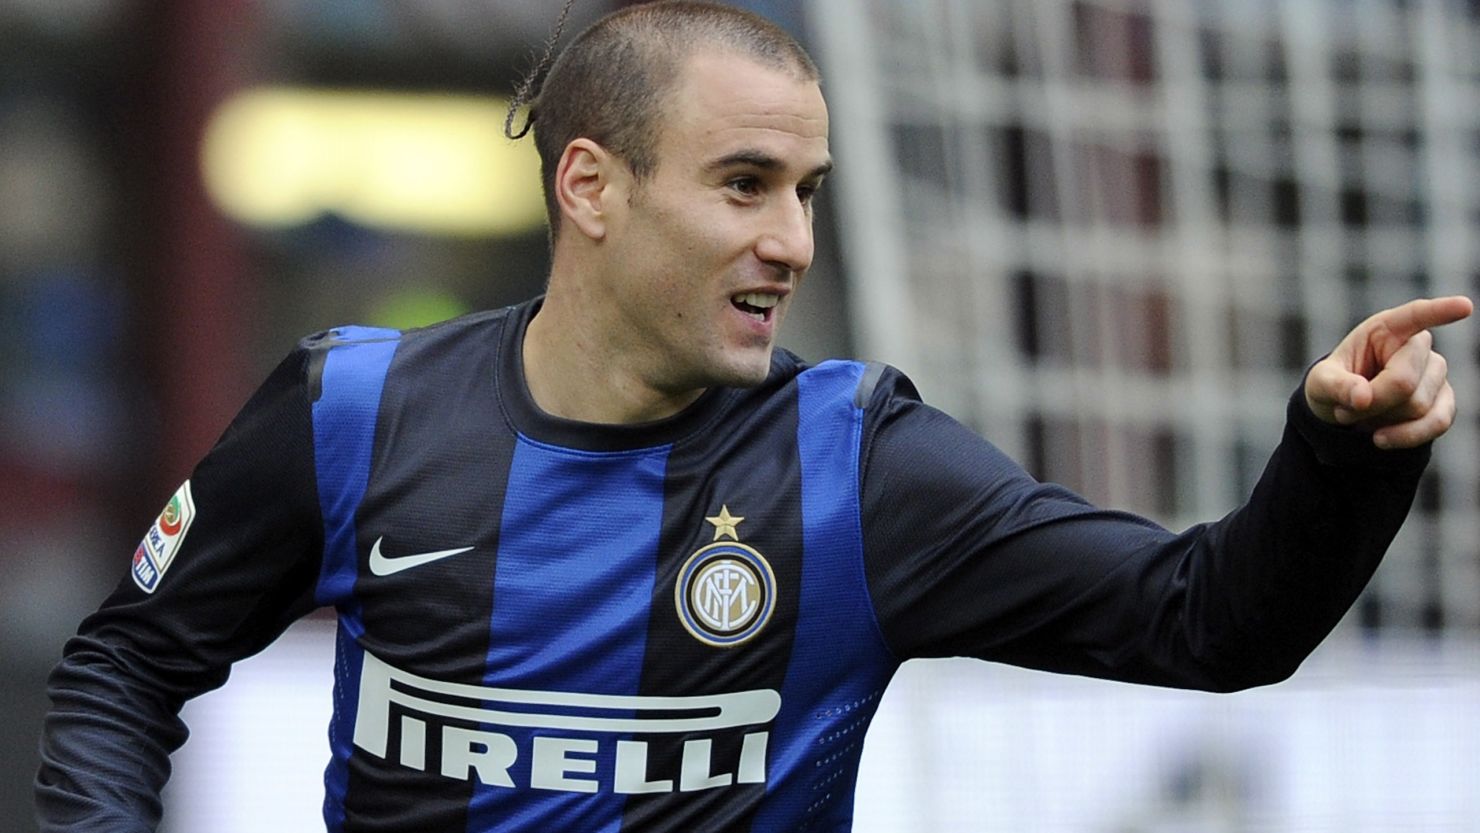 Rodrigo Palacio opened the scoring for Inter but they could only manage a 2-2 draw with Cagliari at the San Siro